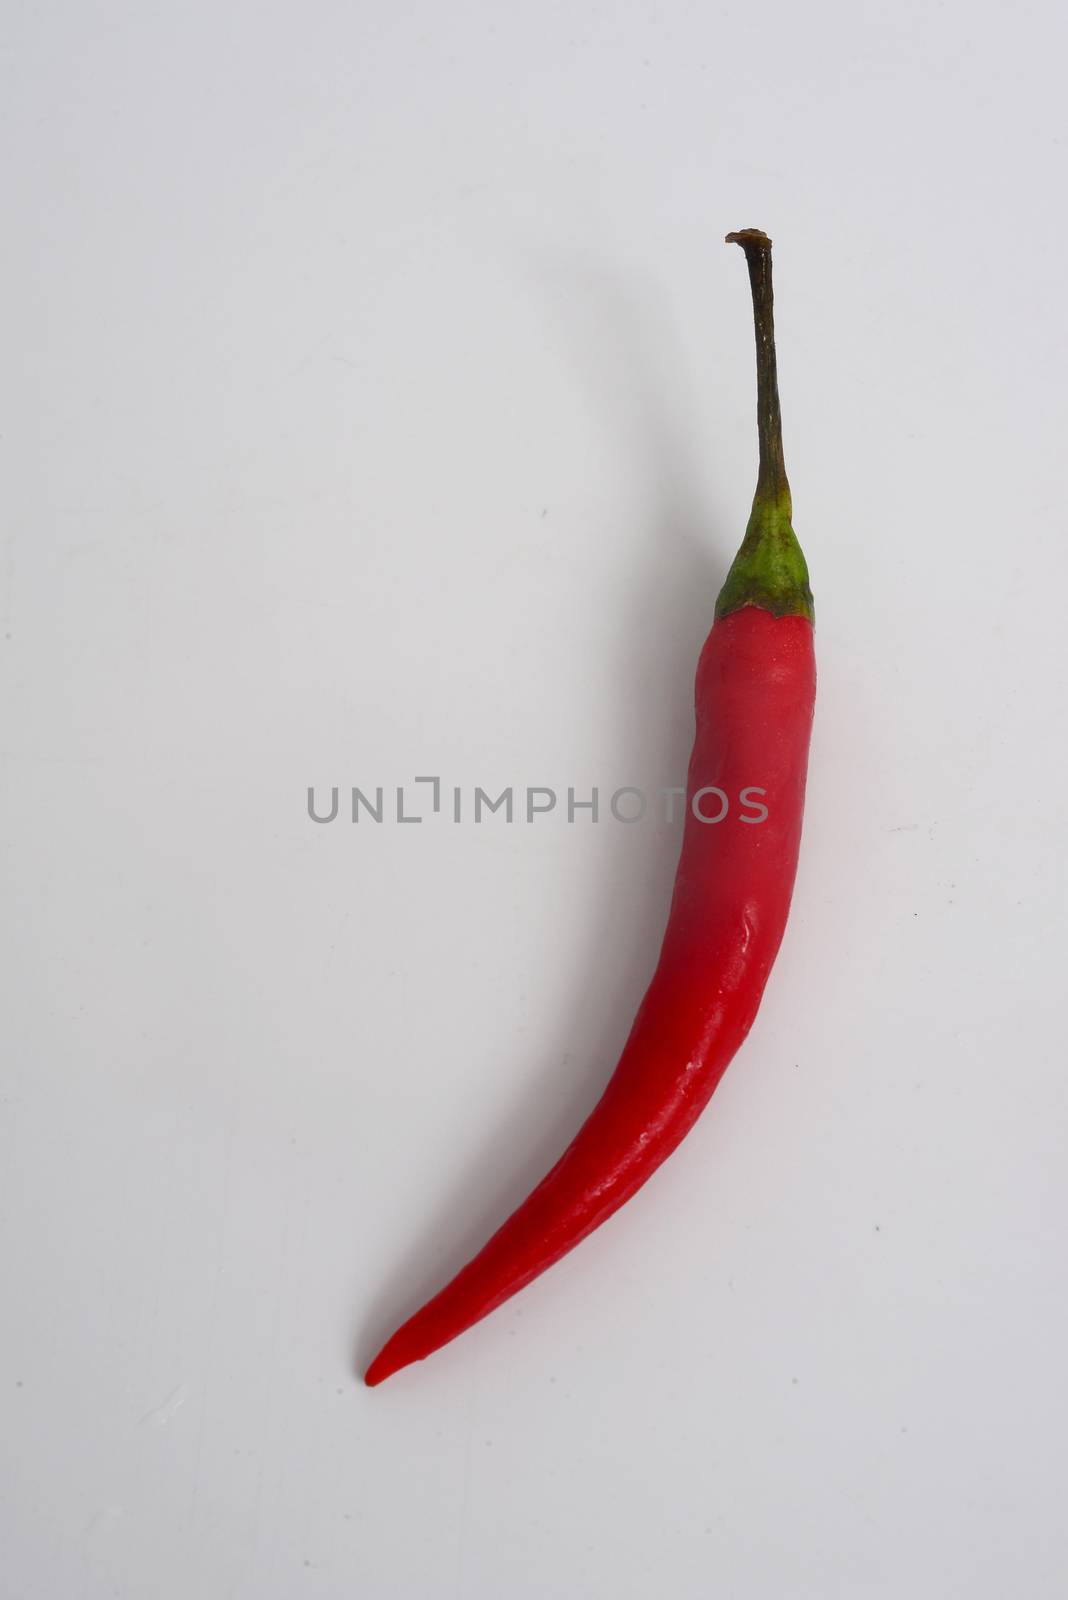 Red chili on white background with copy space for text